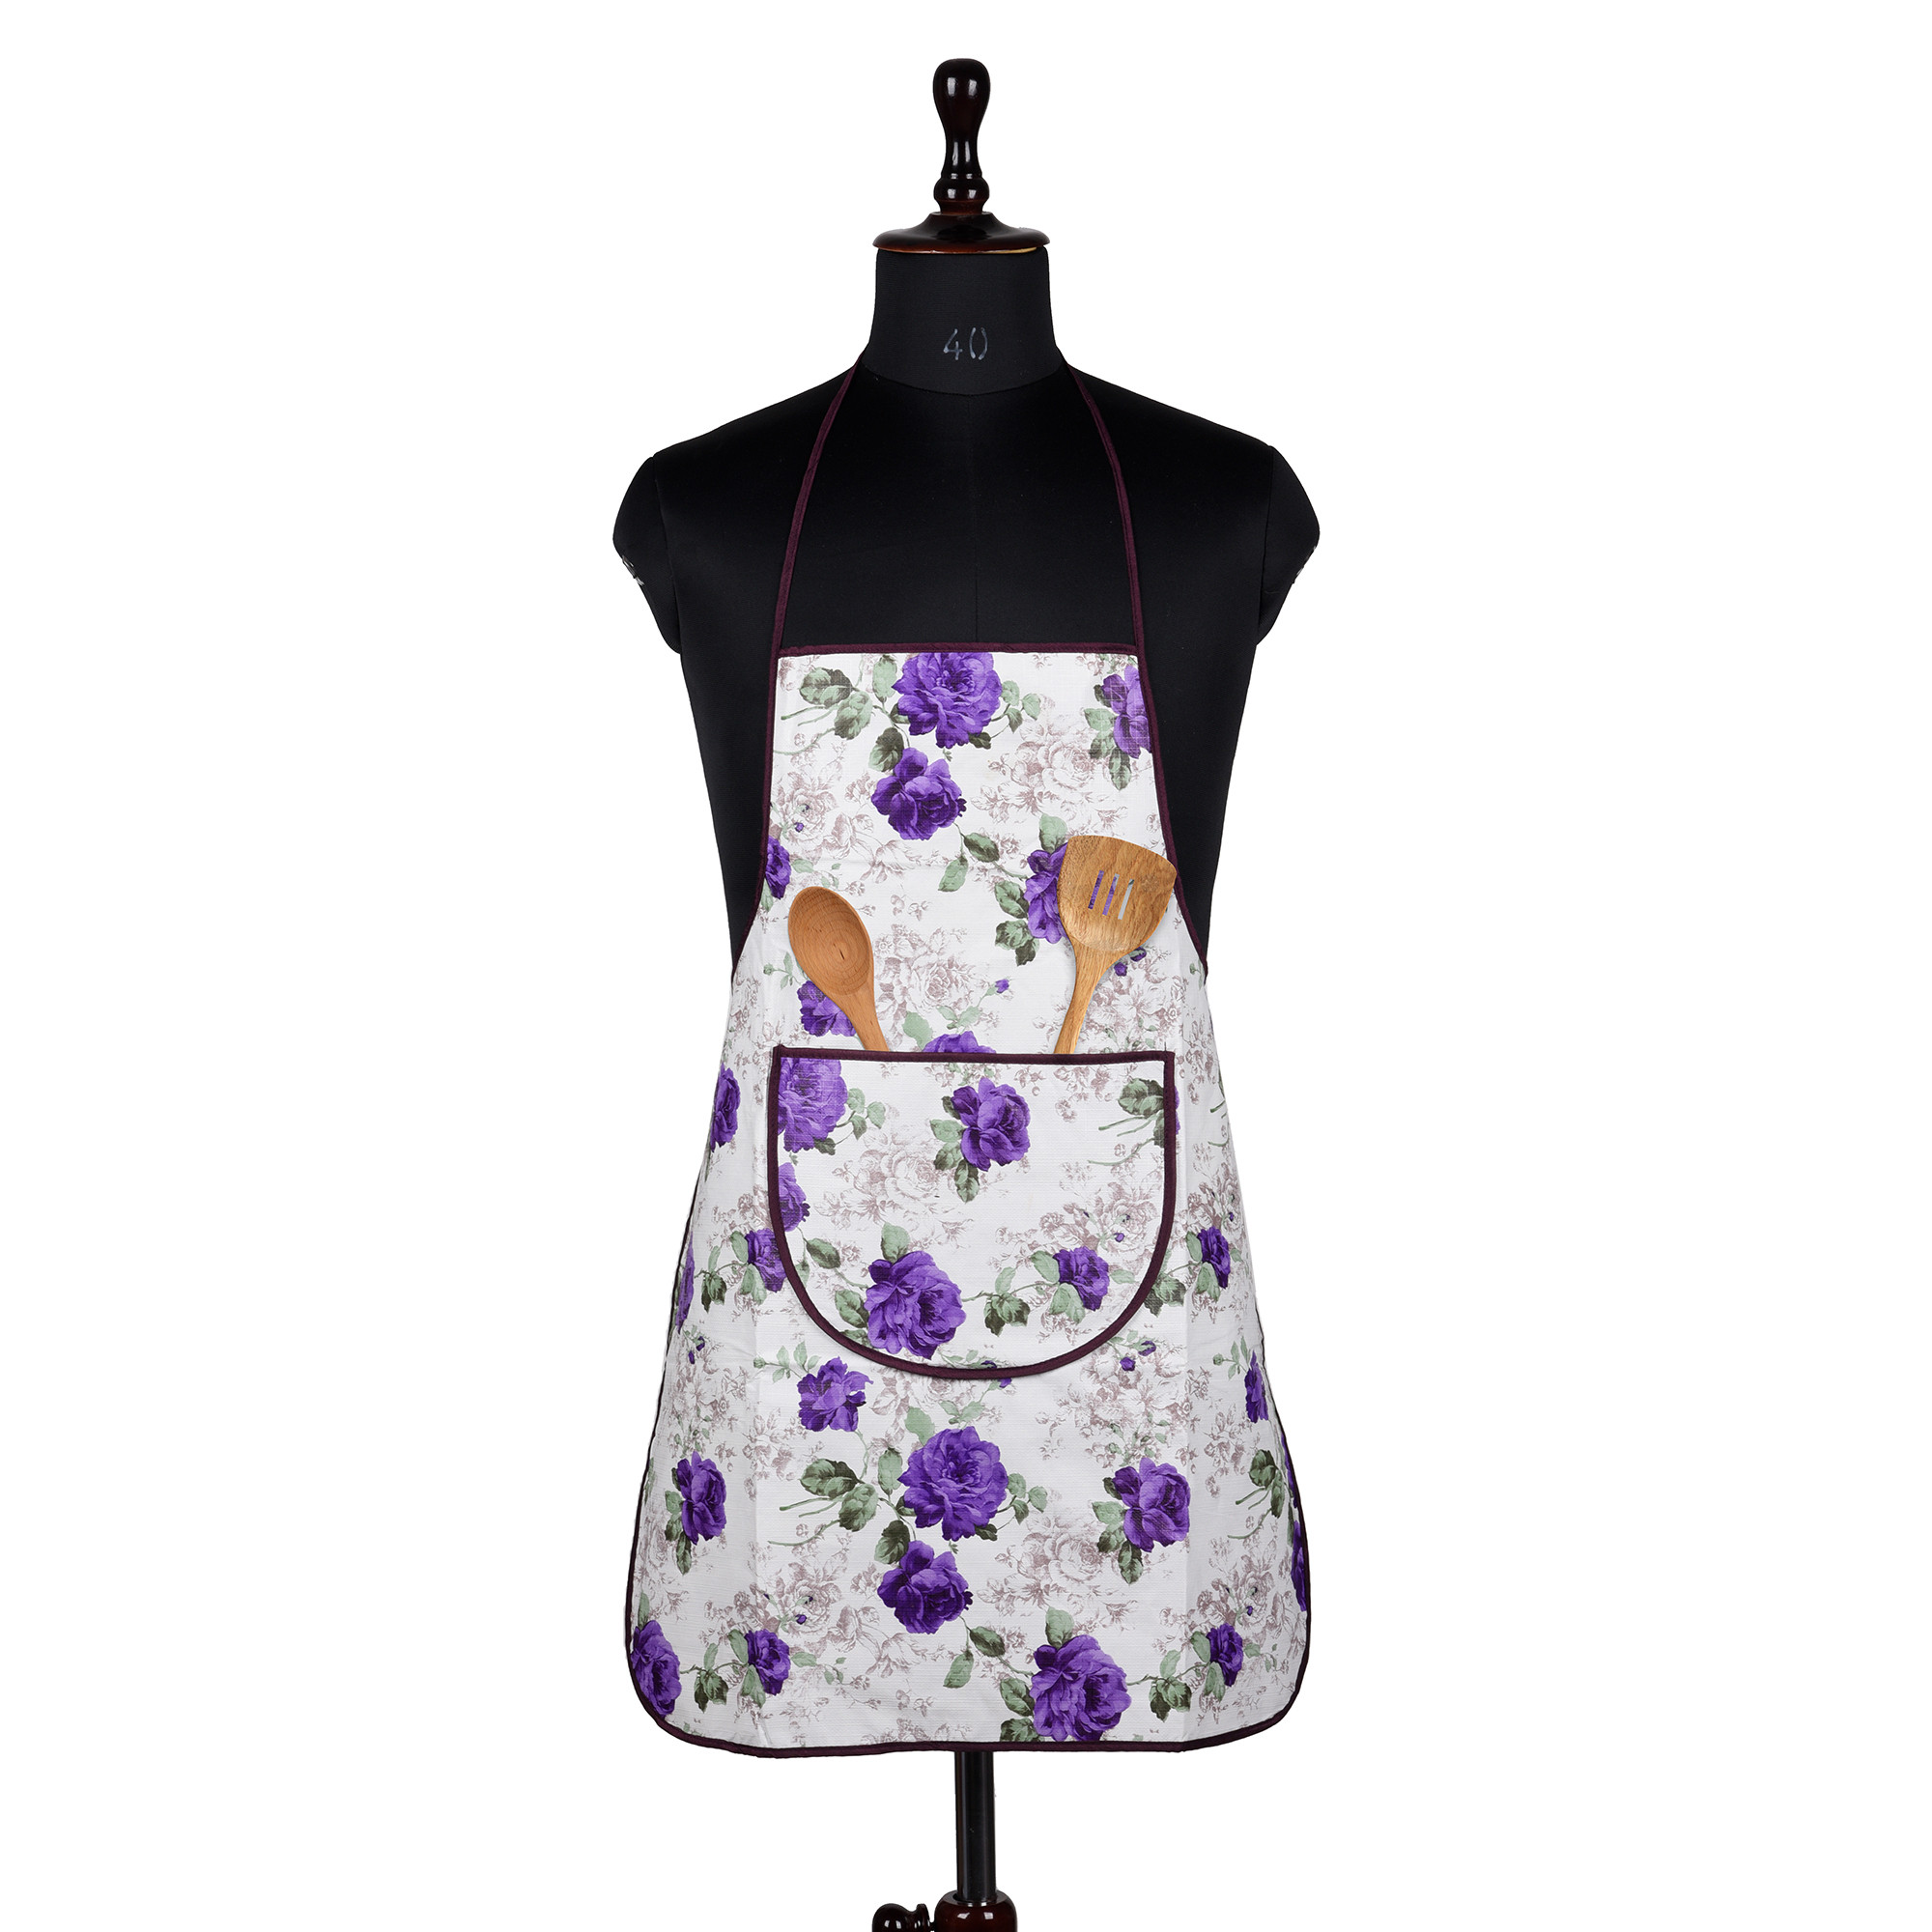 Kuber Industries Apron | PVC Cooking Kitchen Apron | Apron for Restaurent | Purple Flower Apron for Housewife | Chef Apron with Ties | Center Pocket Apron | White